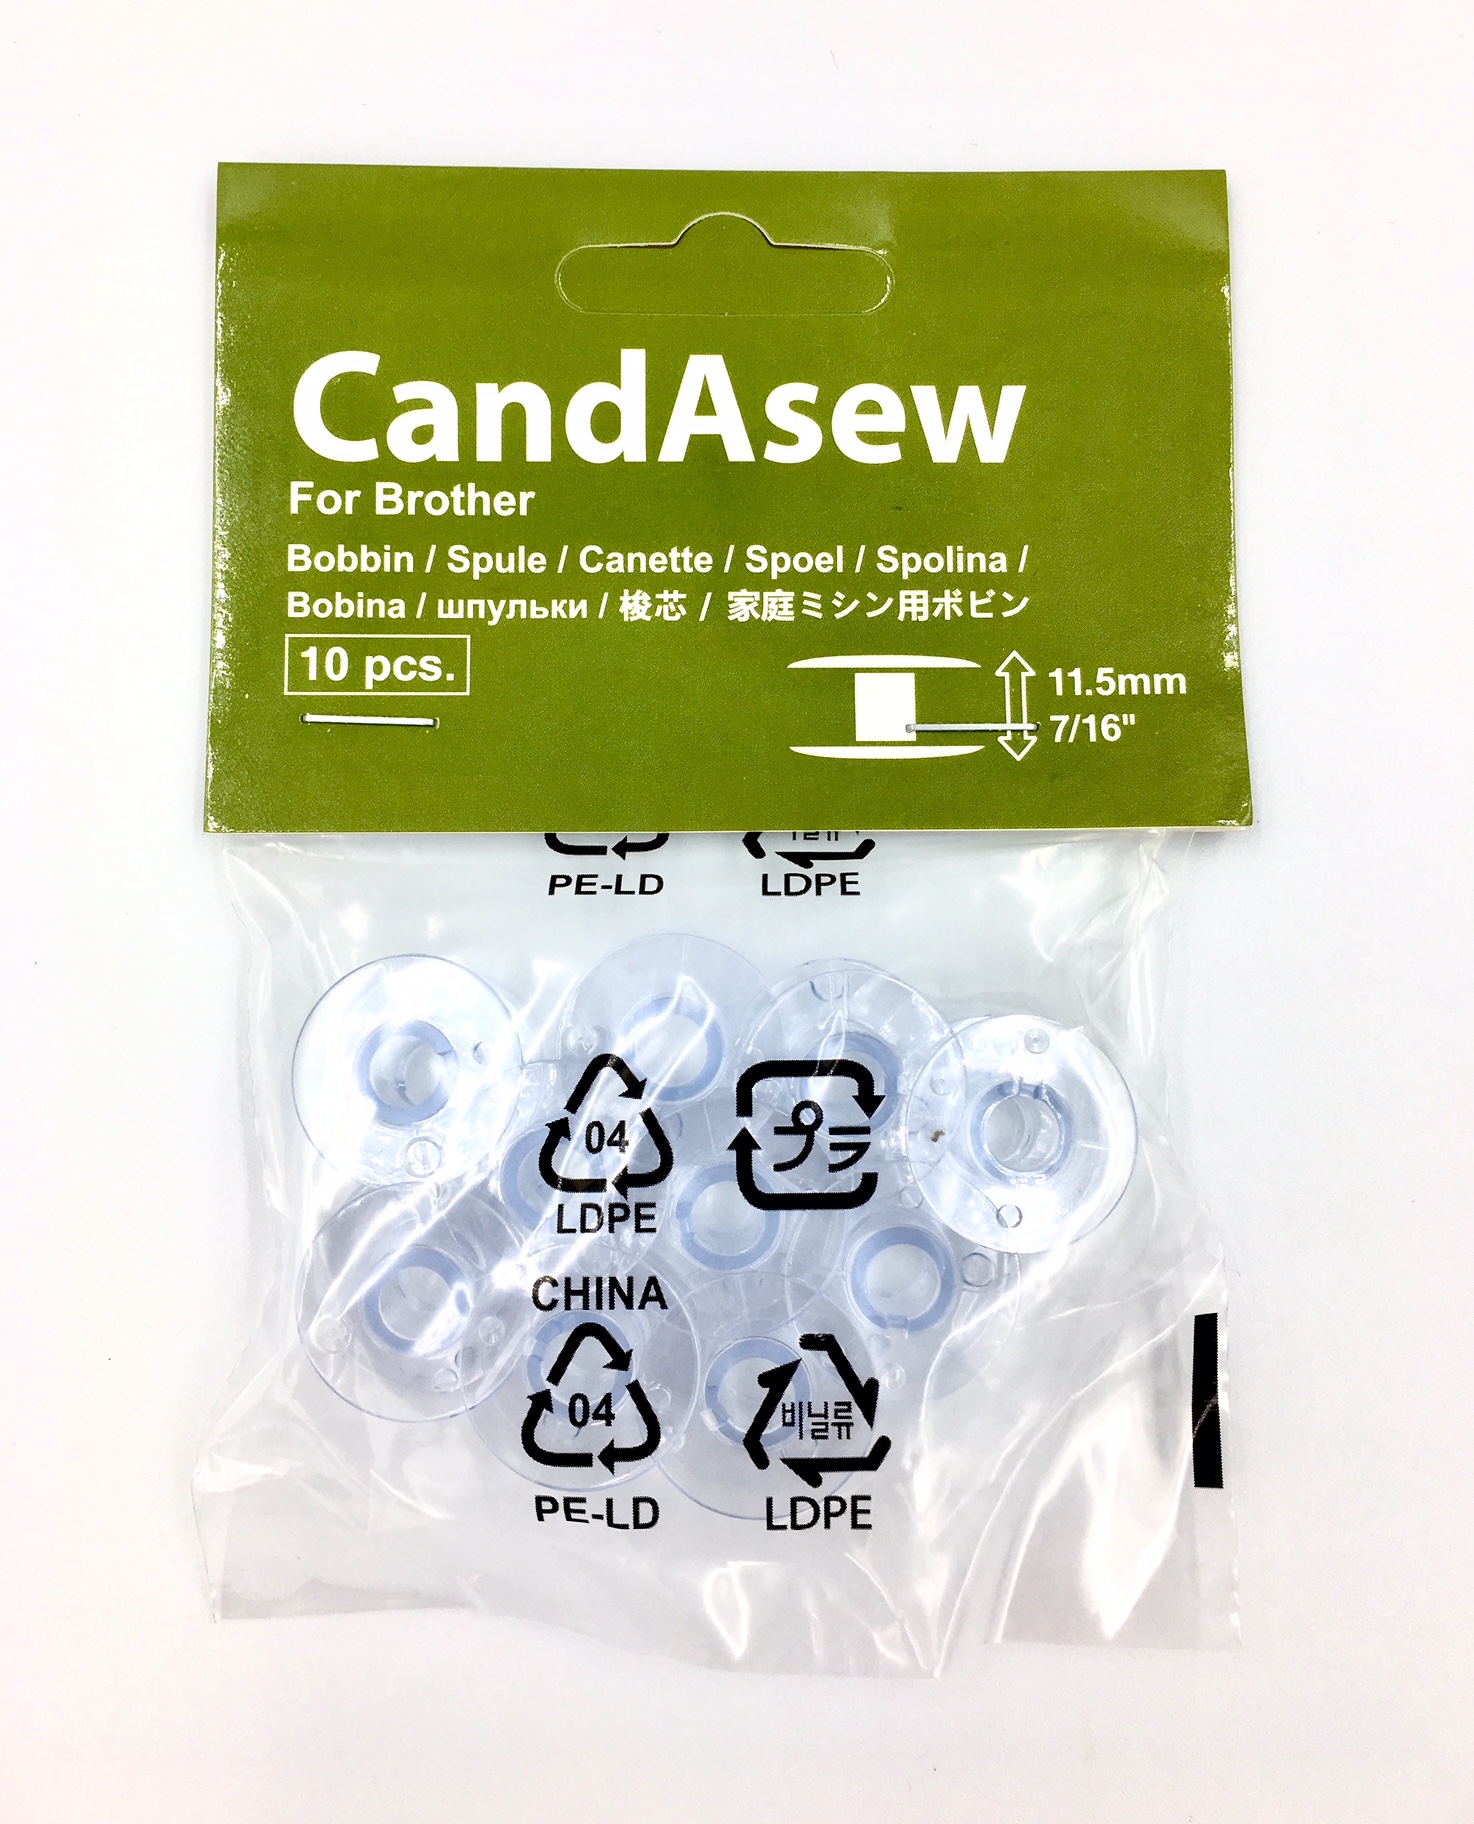 Candasew 11.5mm Bobbin for Brother - 10 Pack (SFB, SA156)